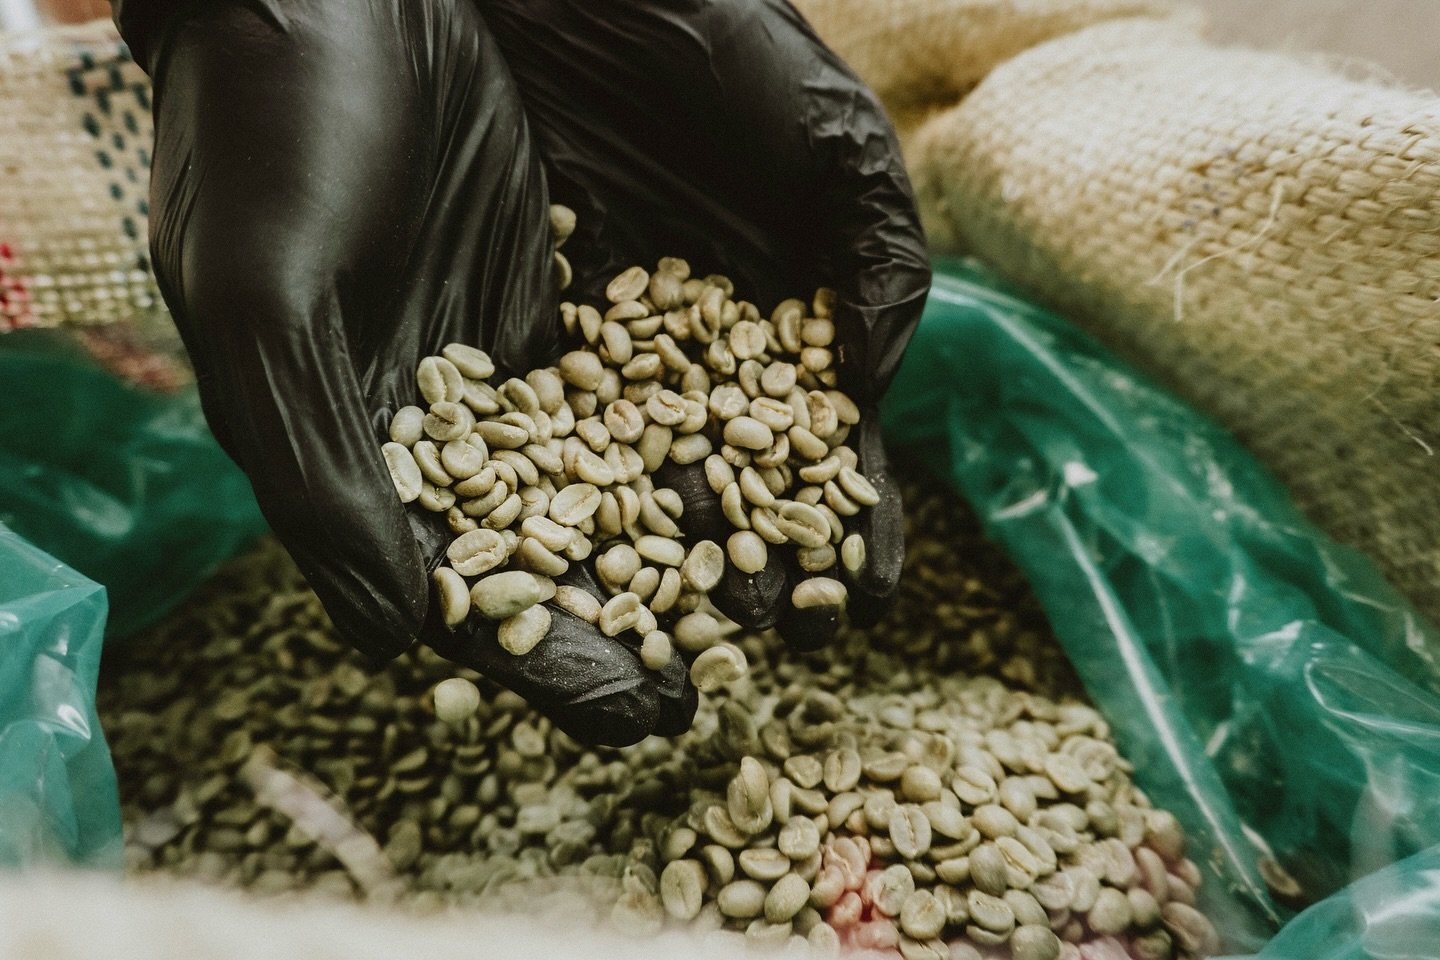 Well-trained roasting masters select the finest varieties of Arabica and Robusta beans from plantations located in extremely high altitudes, renowned for their clean air and rich subsoil. Once we receive green coffee beans that have been certified fo